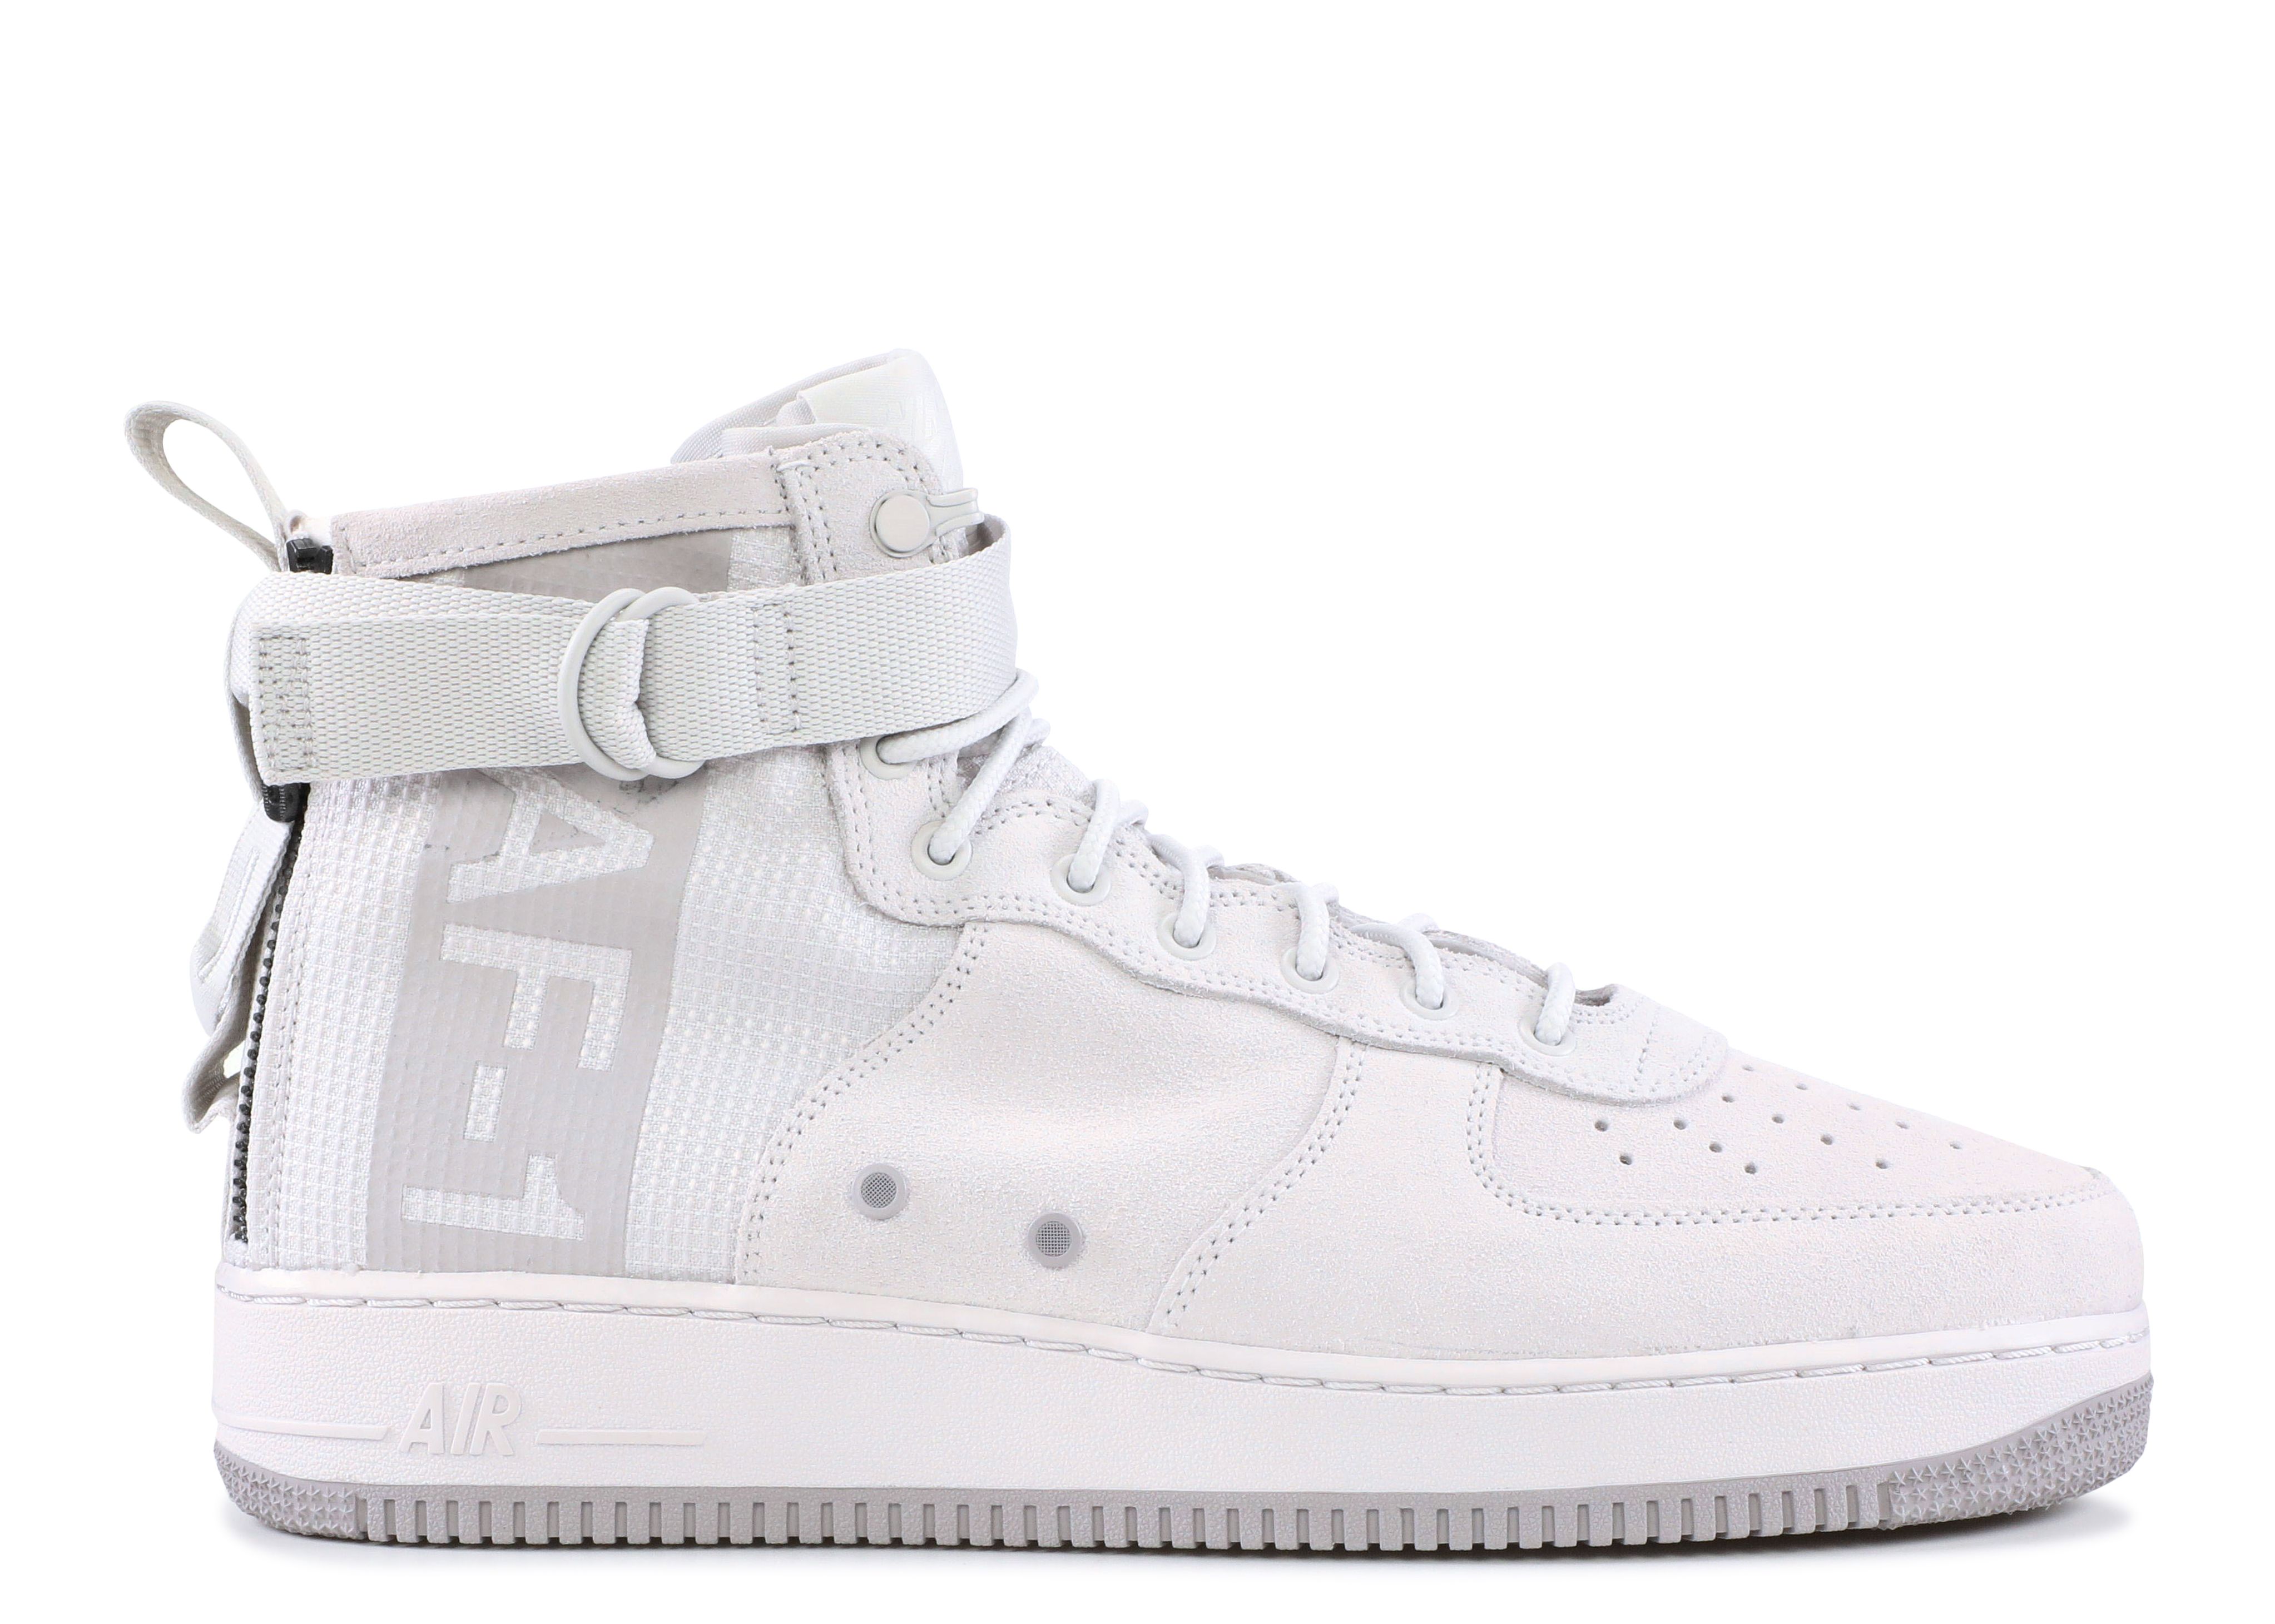 grey suede air force 1 high top